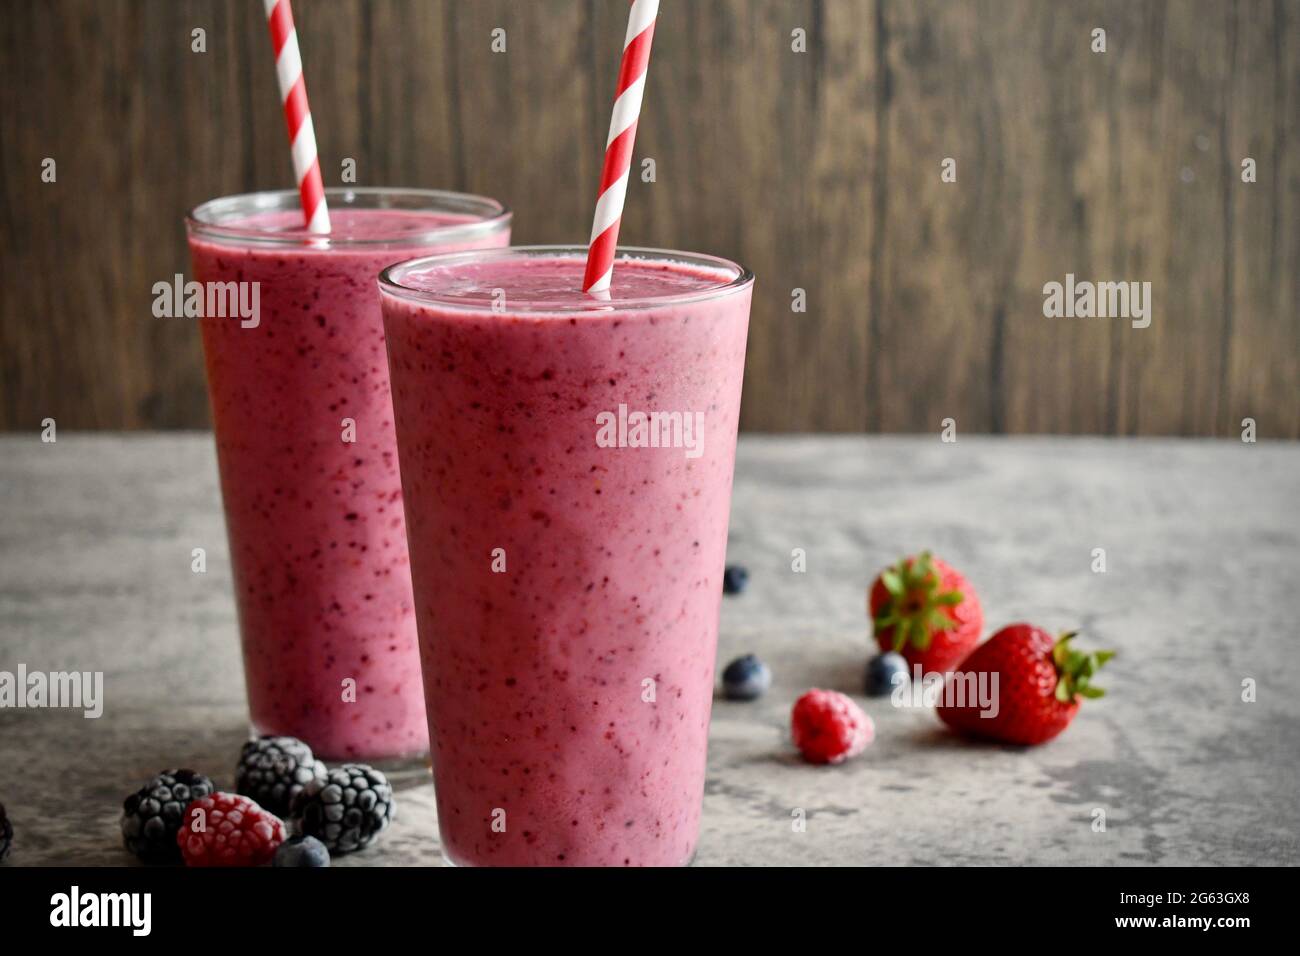 Two mixed berry smoothies in tall decorative glasses on stone surface Stock Photo